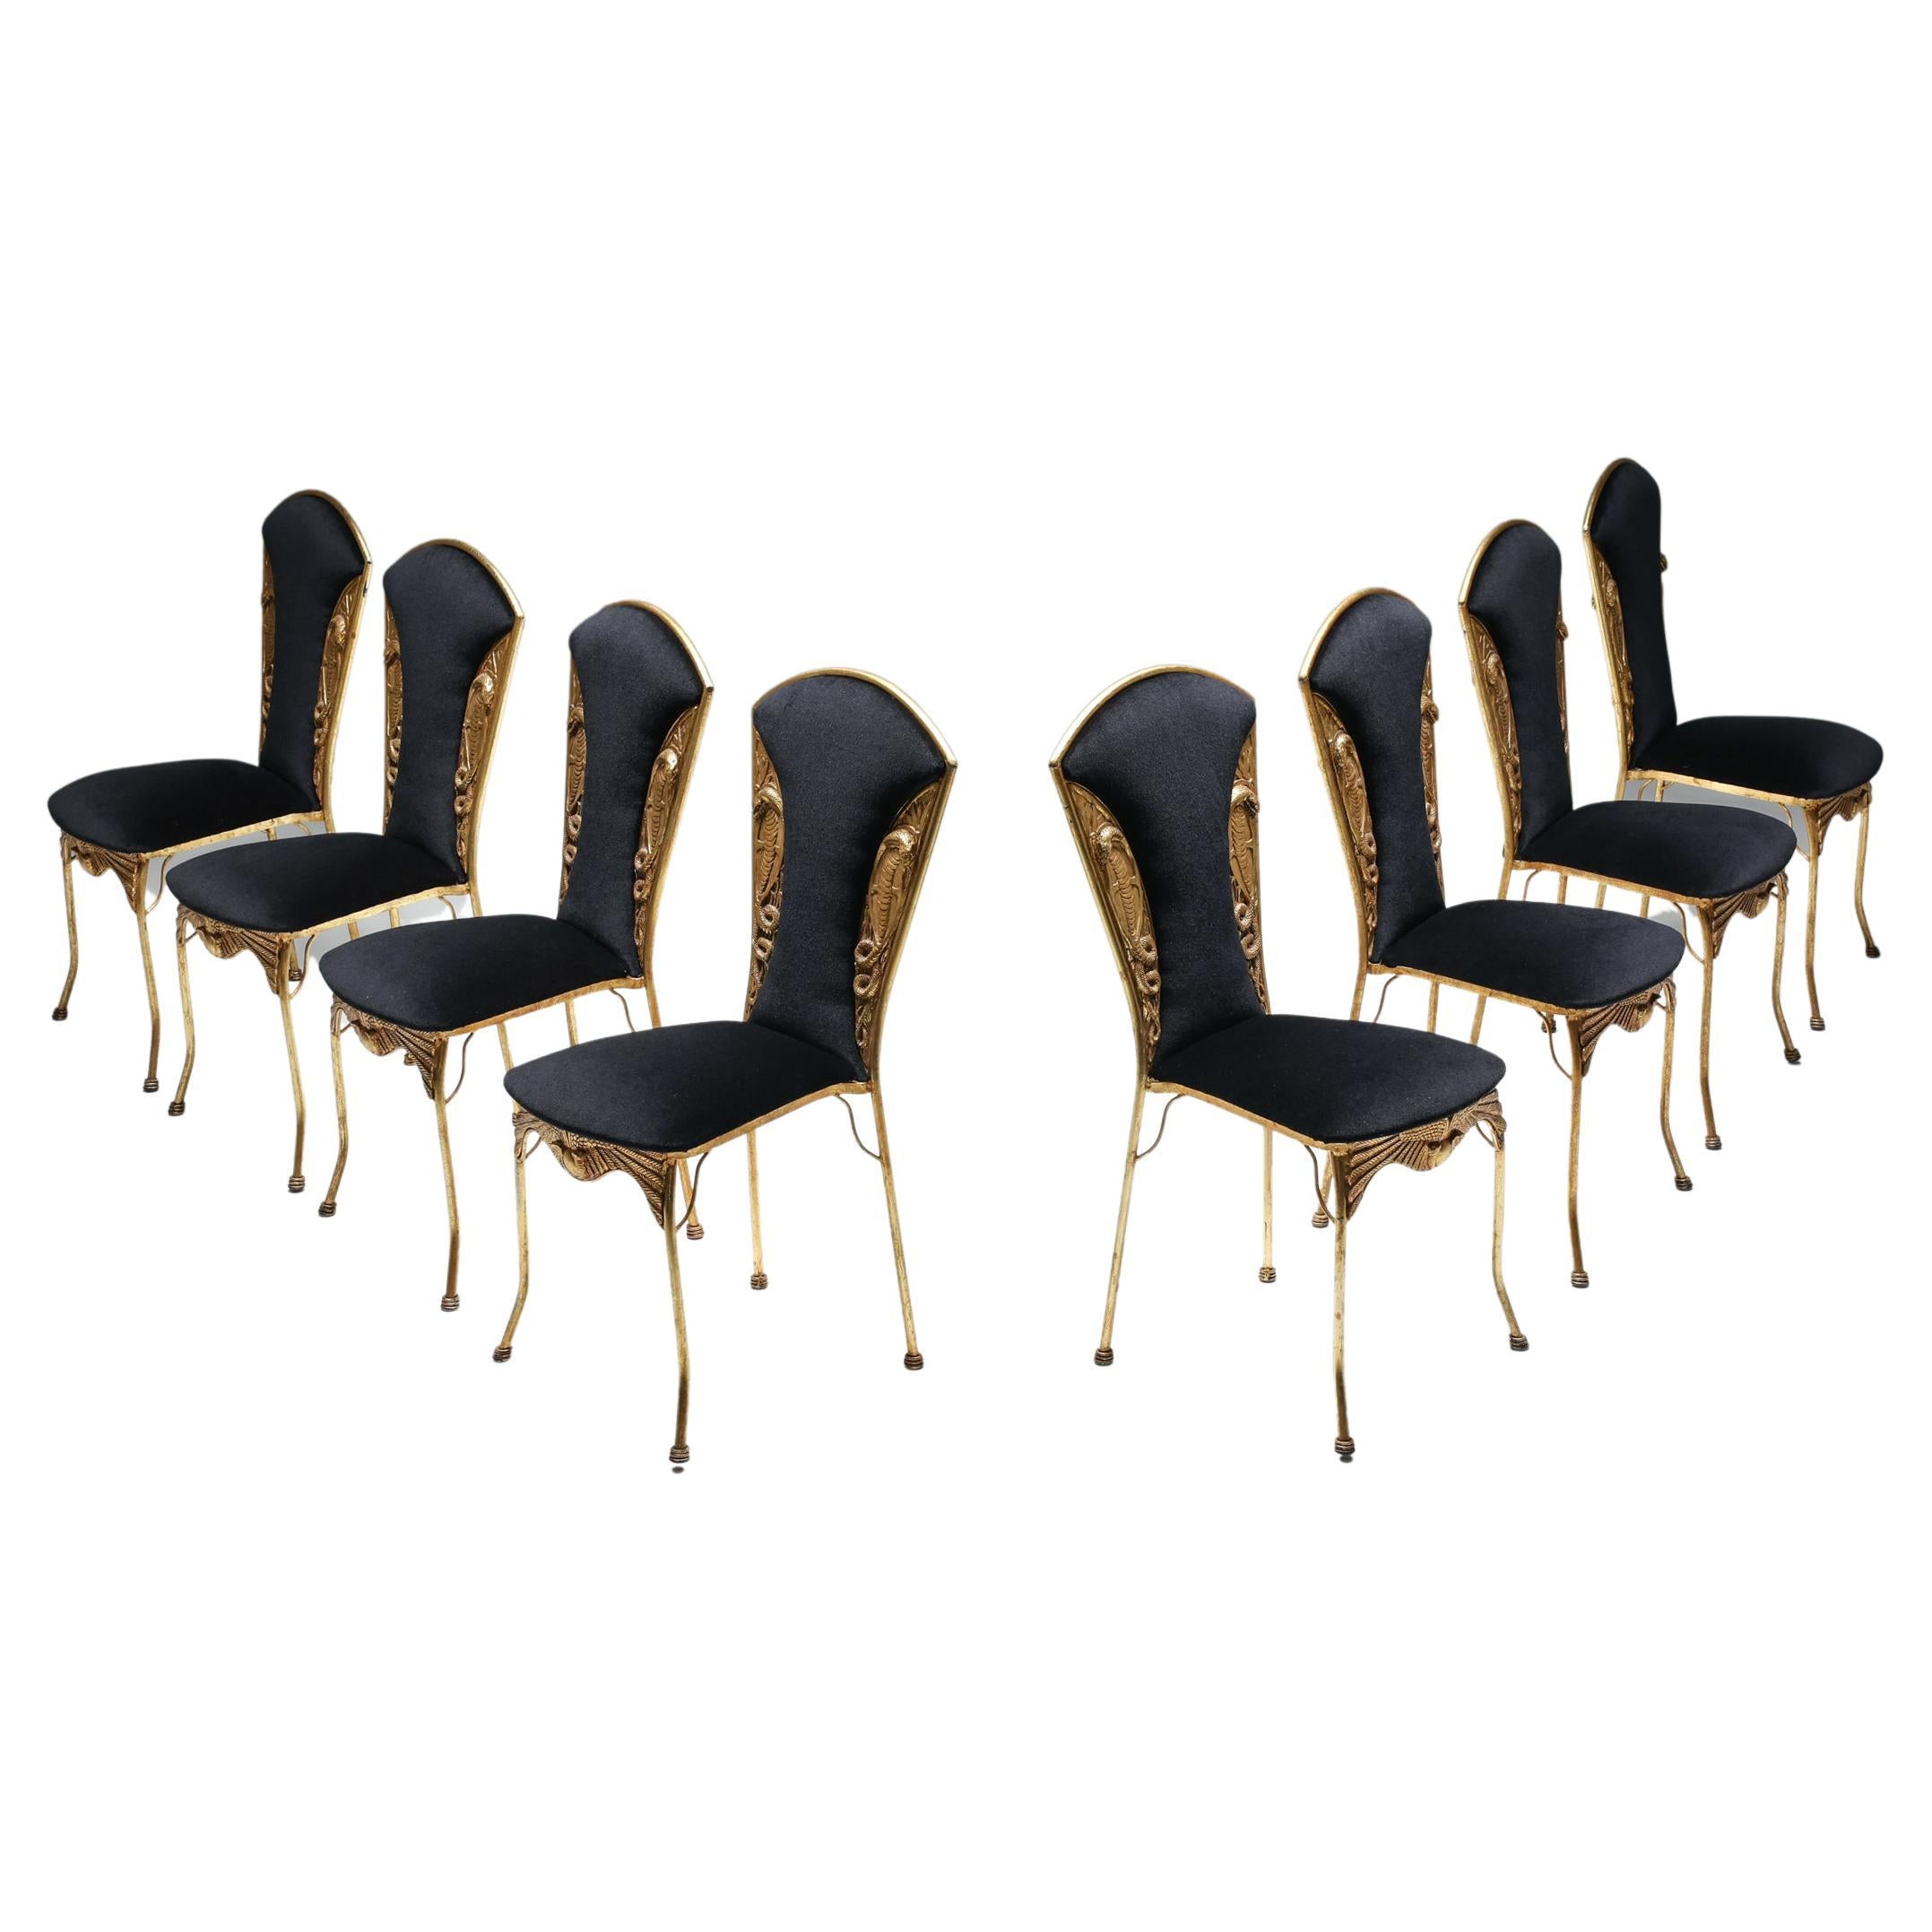 Hollywood Regency, Gilt Metal Cleopatra Dining Chairs Reupholstered, 1970's